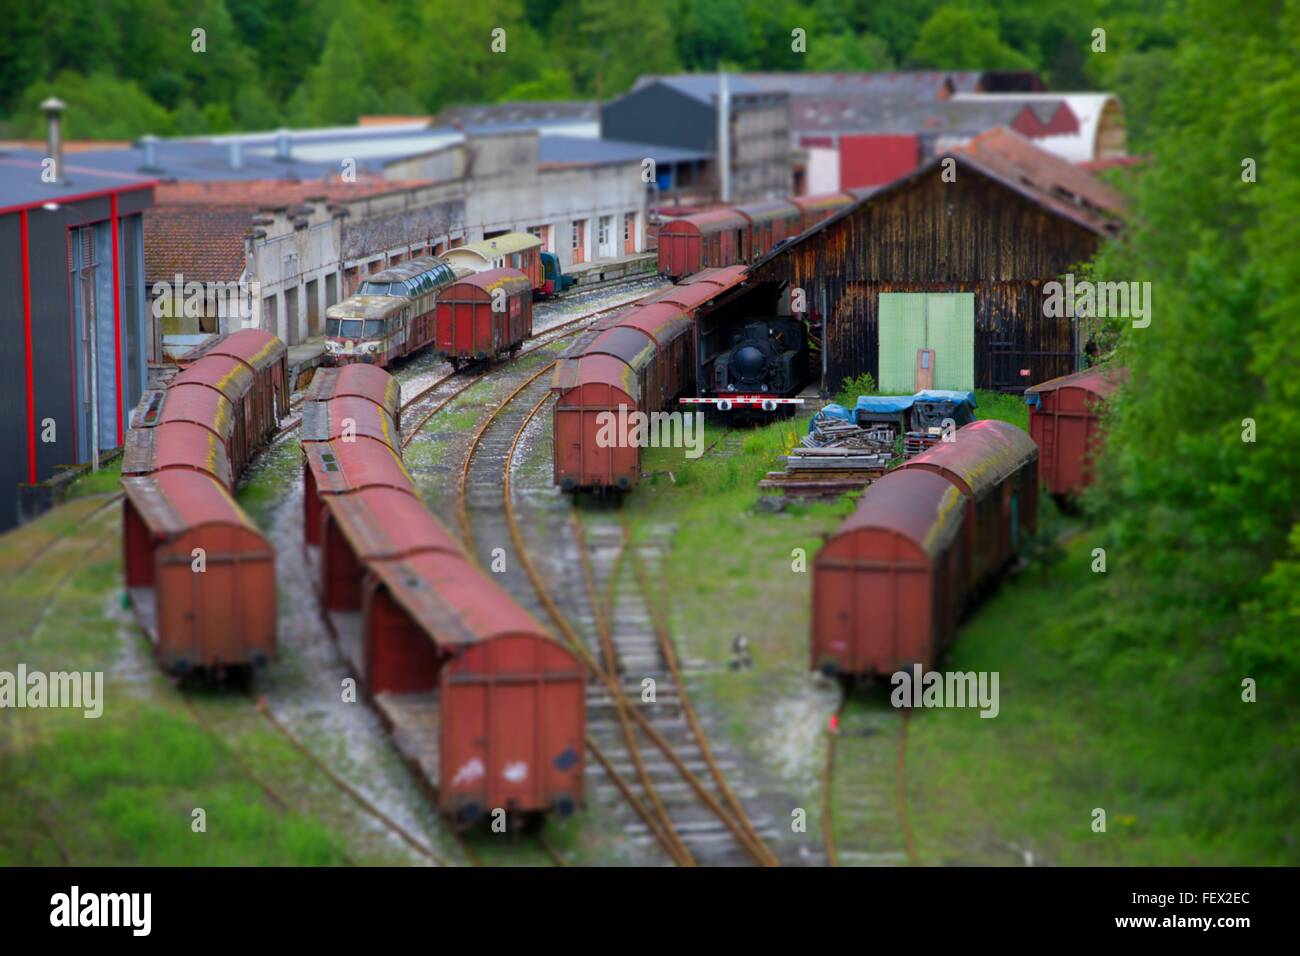 High Angle View Of Freight Cars In Yard Stock Photo